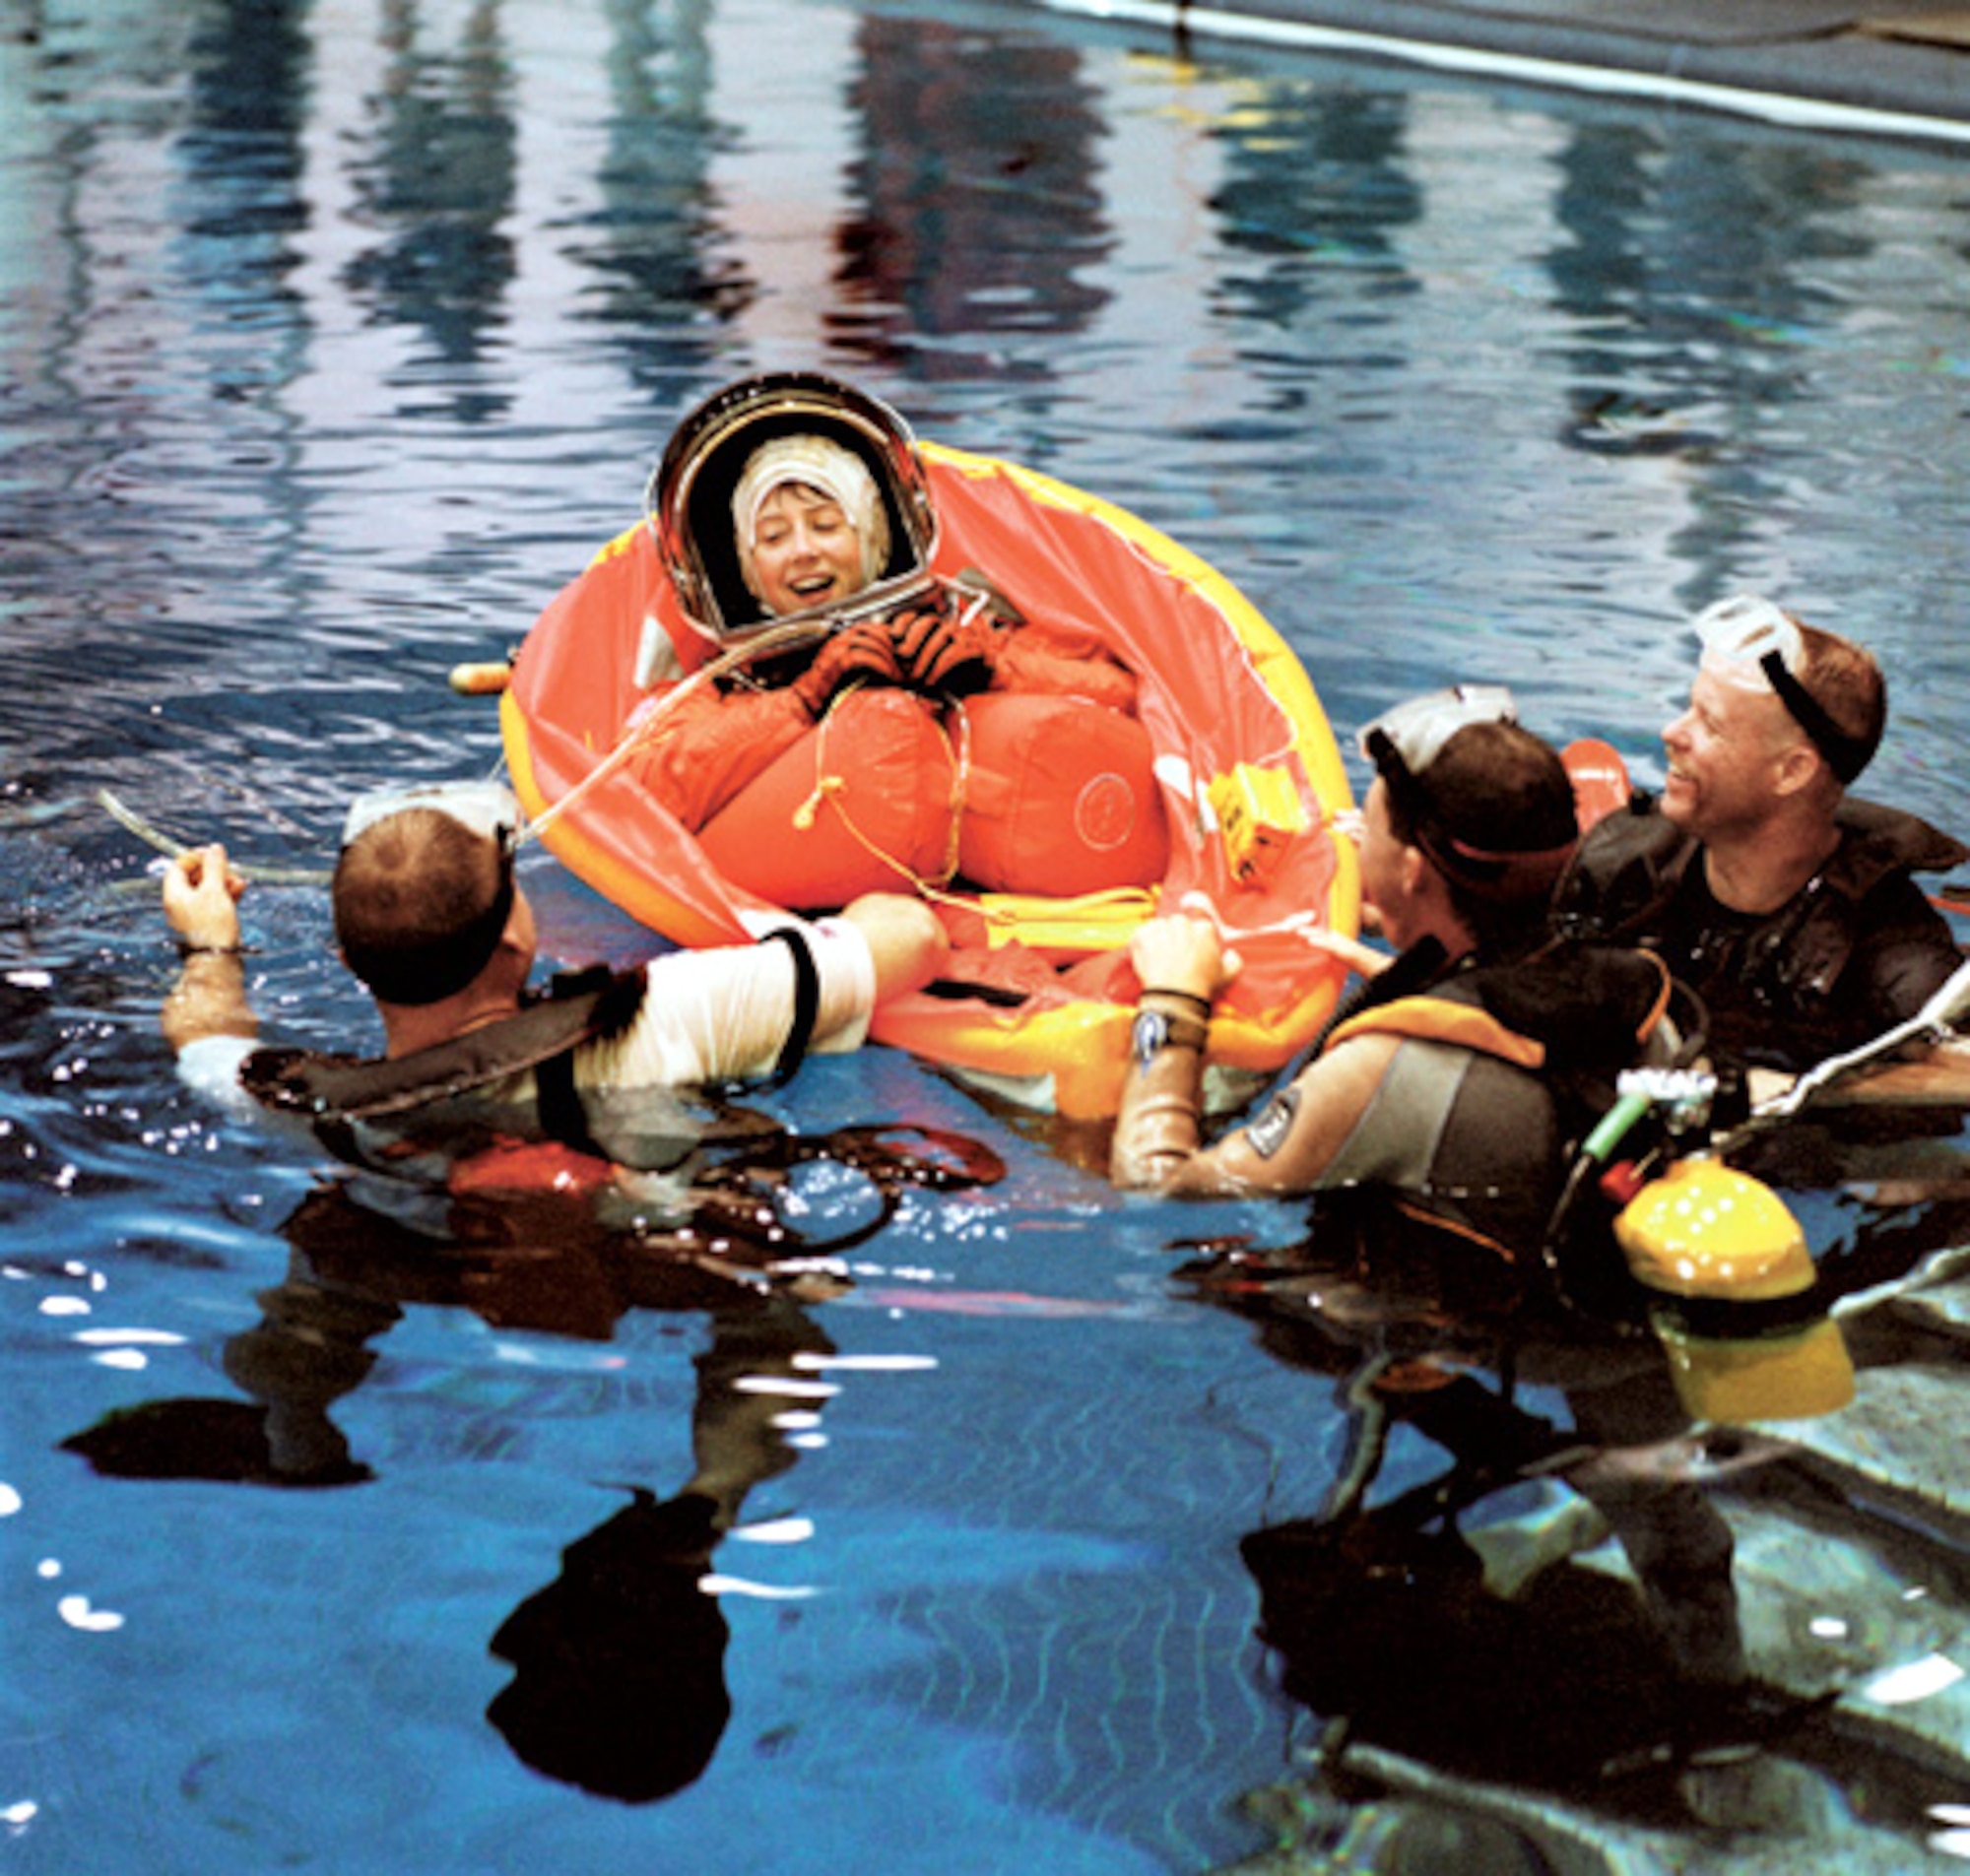 HOUSTON -- Astronaut and pilot Col. Pam Melroy is assisted by three scuba-equipped divers in the deep pool at the Neutral Buoyancy Laboratory at the Sonny Carter Training Facility near the Johnson Space Center.  She and the rest of the STS-92 crew were participating in an emergency bailout training exercise preparing for next year's scheduled visit to the International Space Station.  (Photo courtesy of NASA)